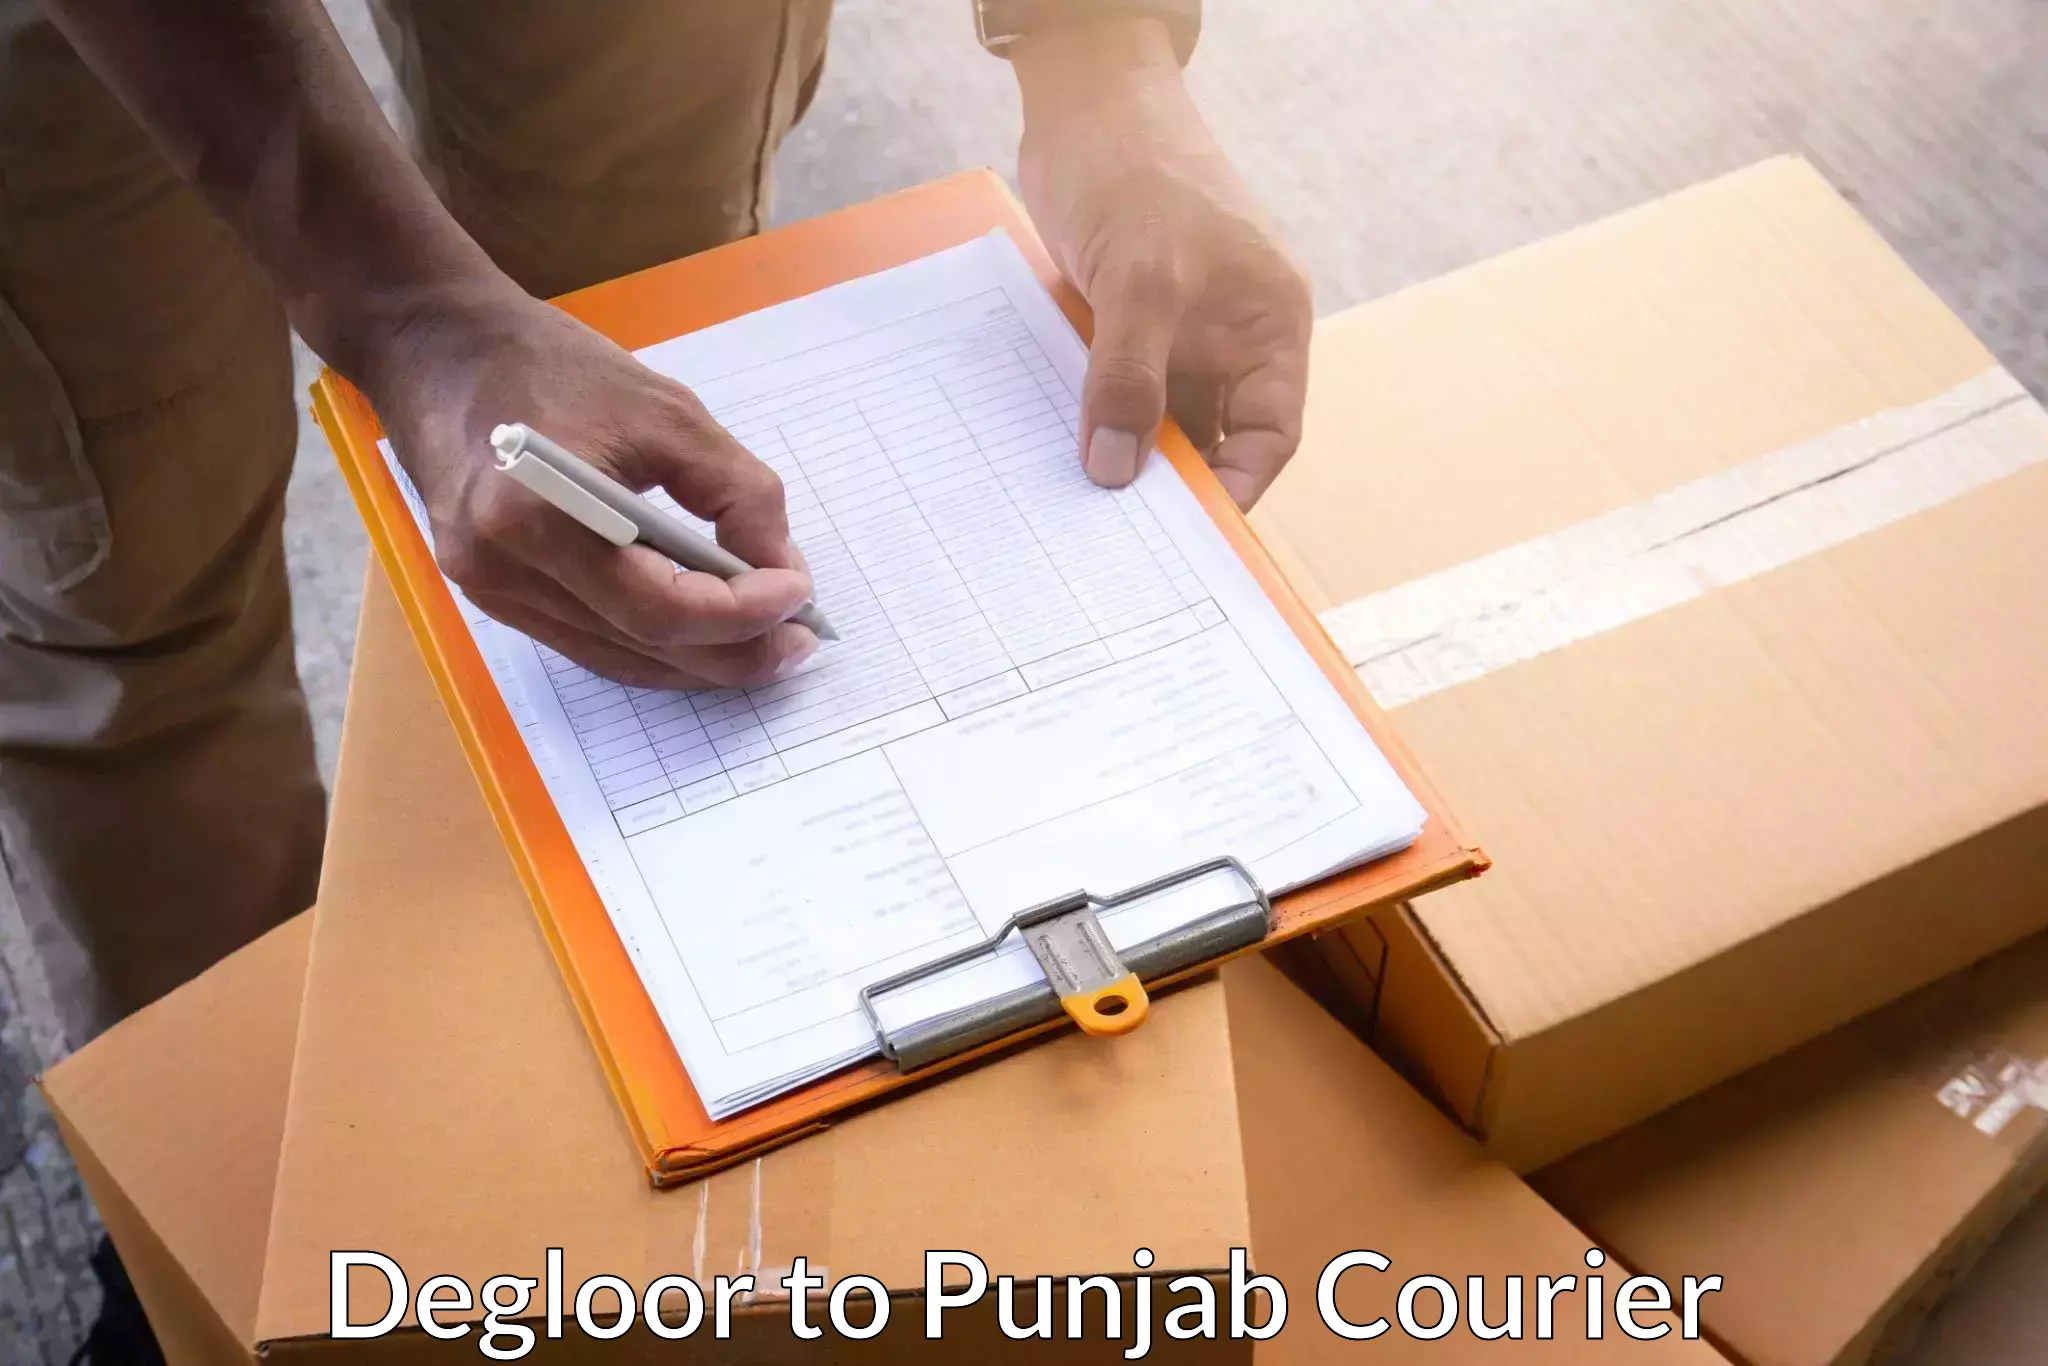 Special handling courier Degloor to Ludhiana